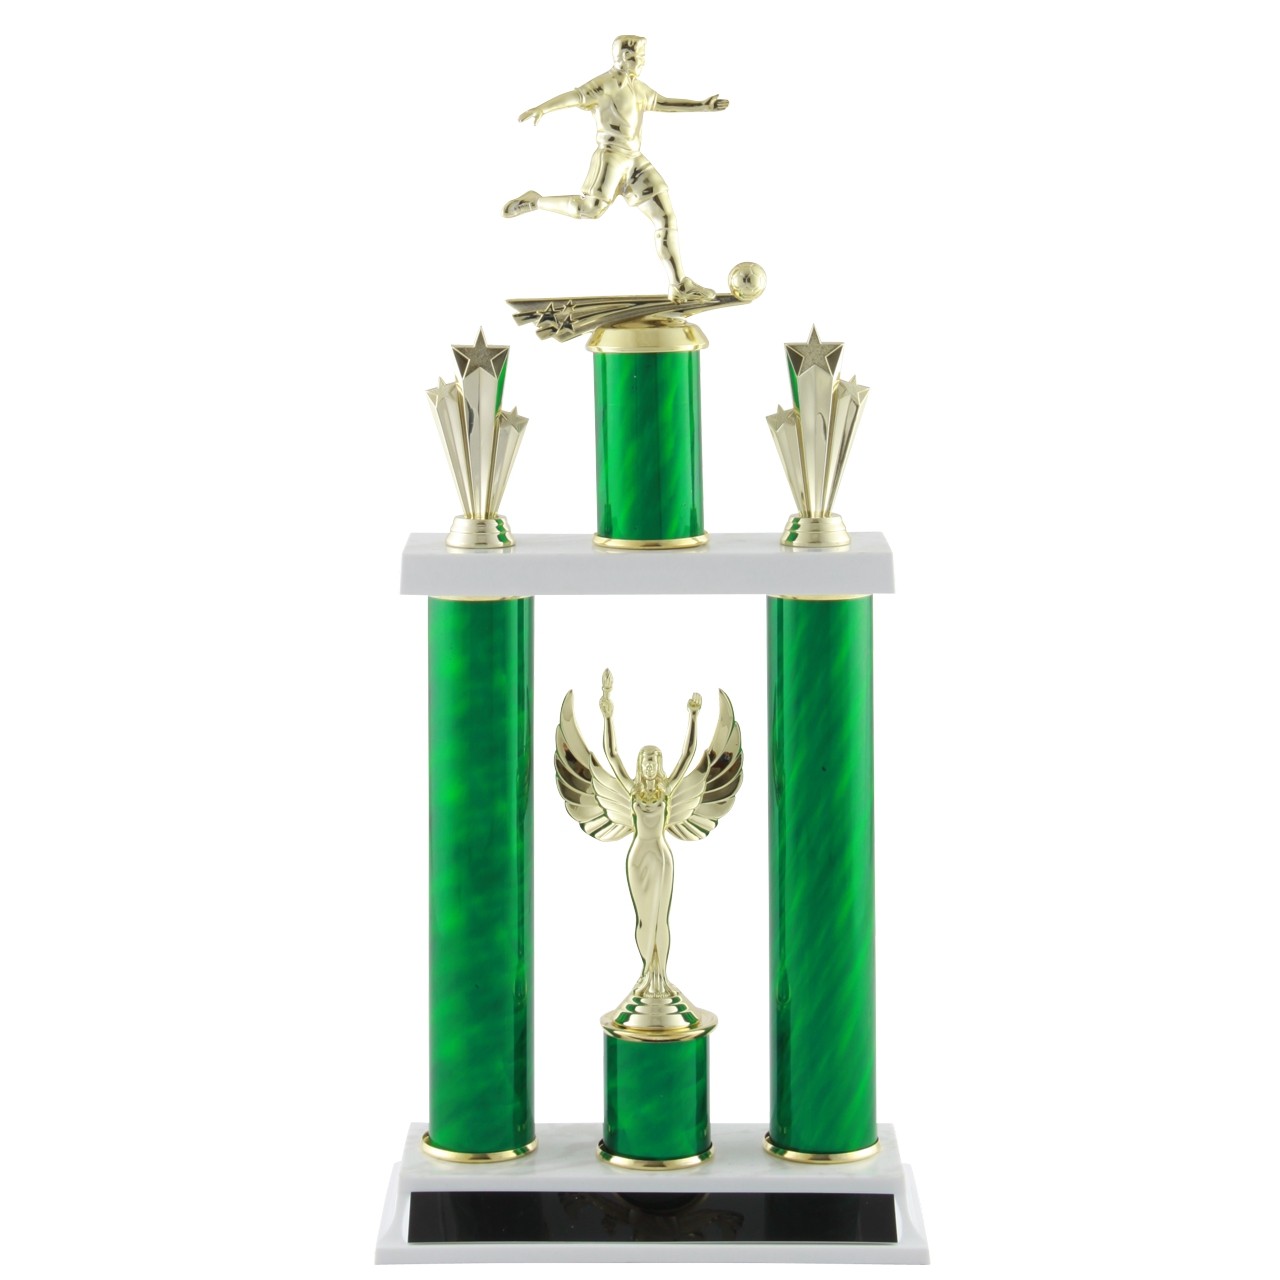 Gold Male Soccer trophy topper 4.5" tall 